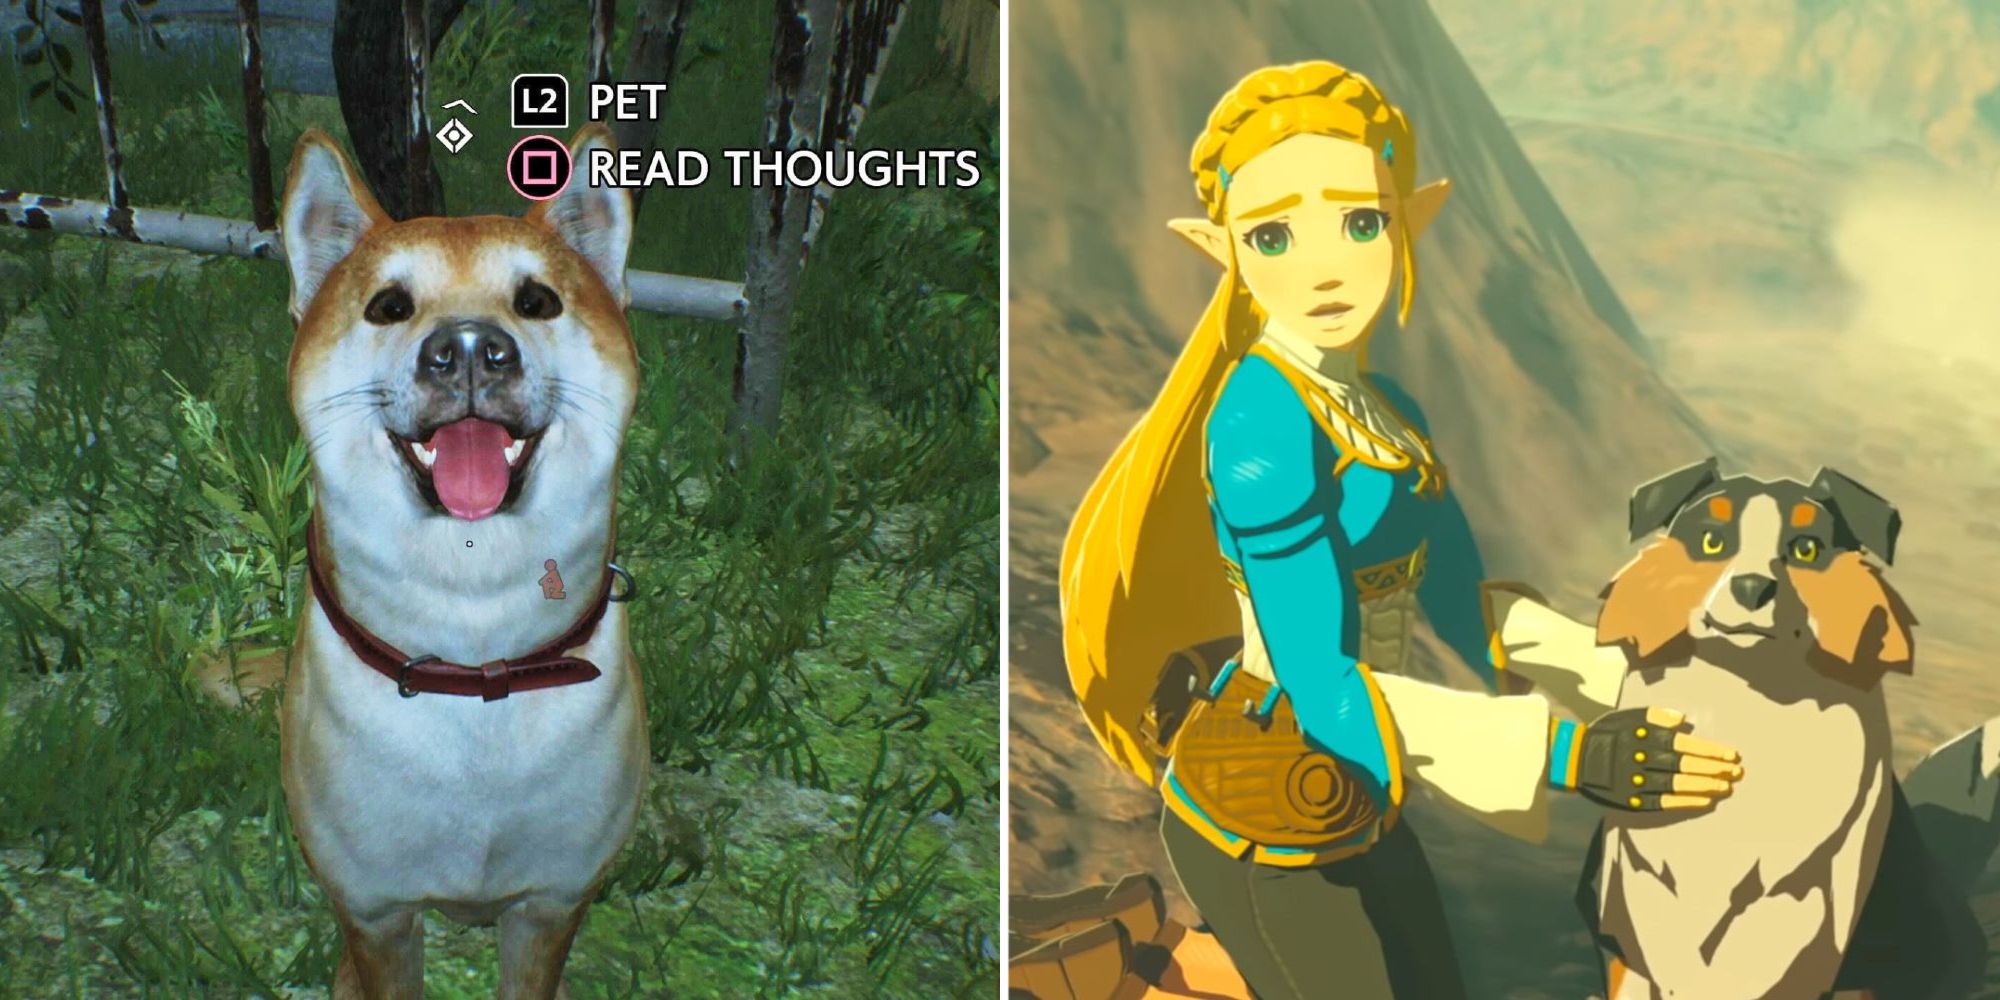 Shiba Inu from Ghostwire Tokyo as well as Zelda with a dog from Breath of the Wild